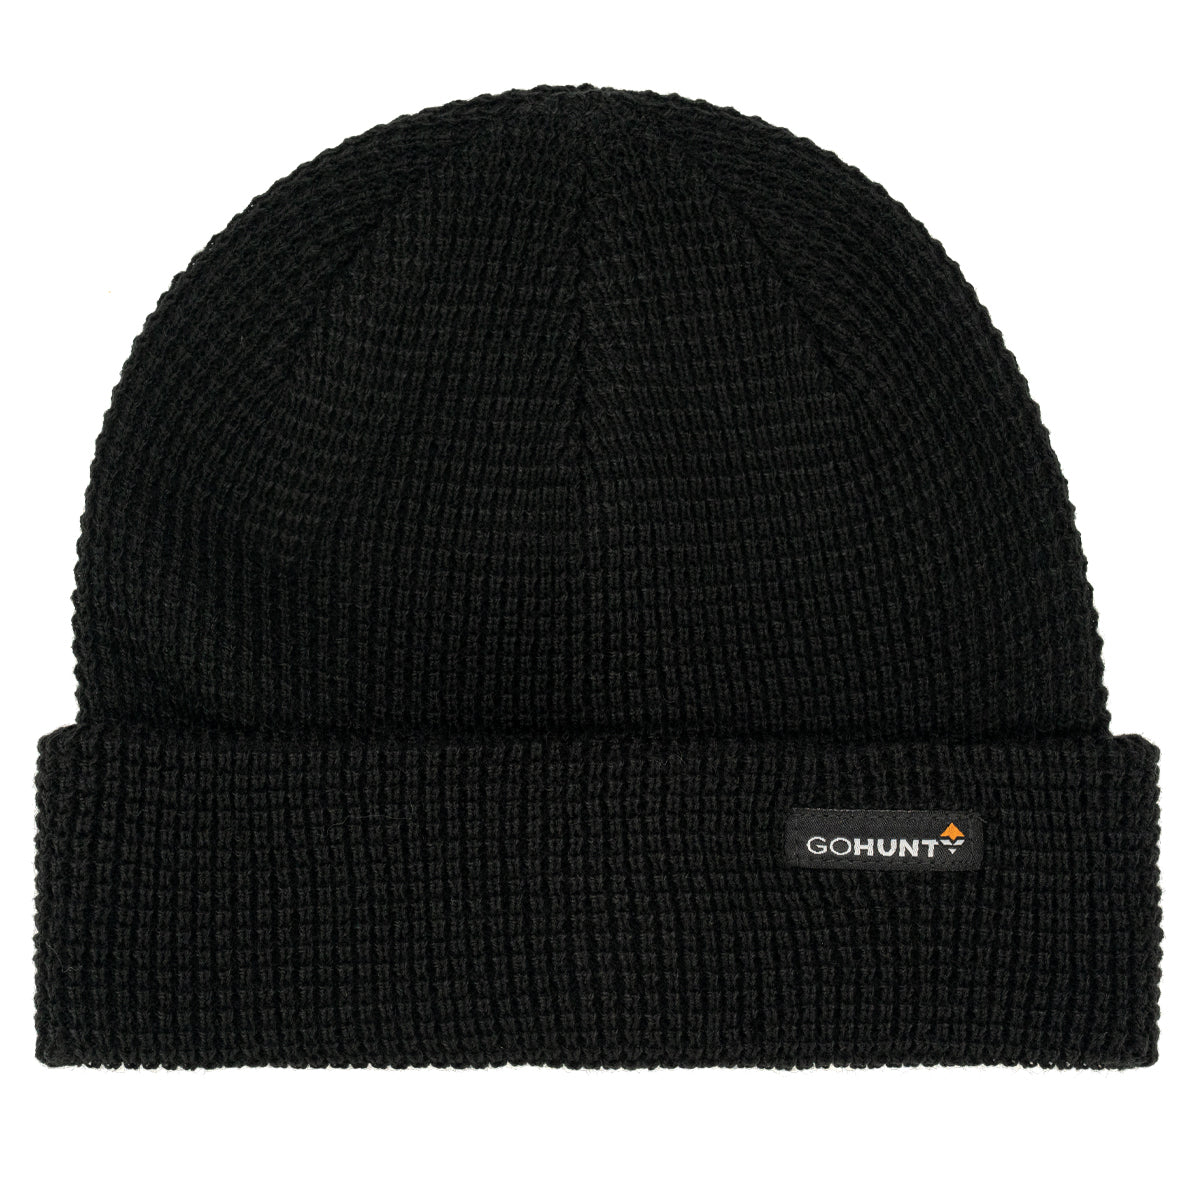 GOHUNT Dome Beanie in  by GOHUNT | GOHUNT - GOHUNT Shop